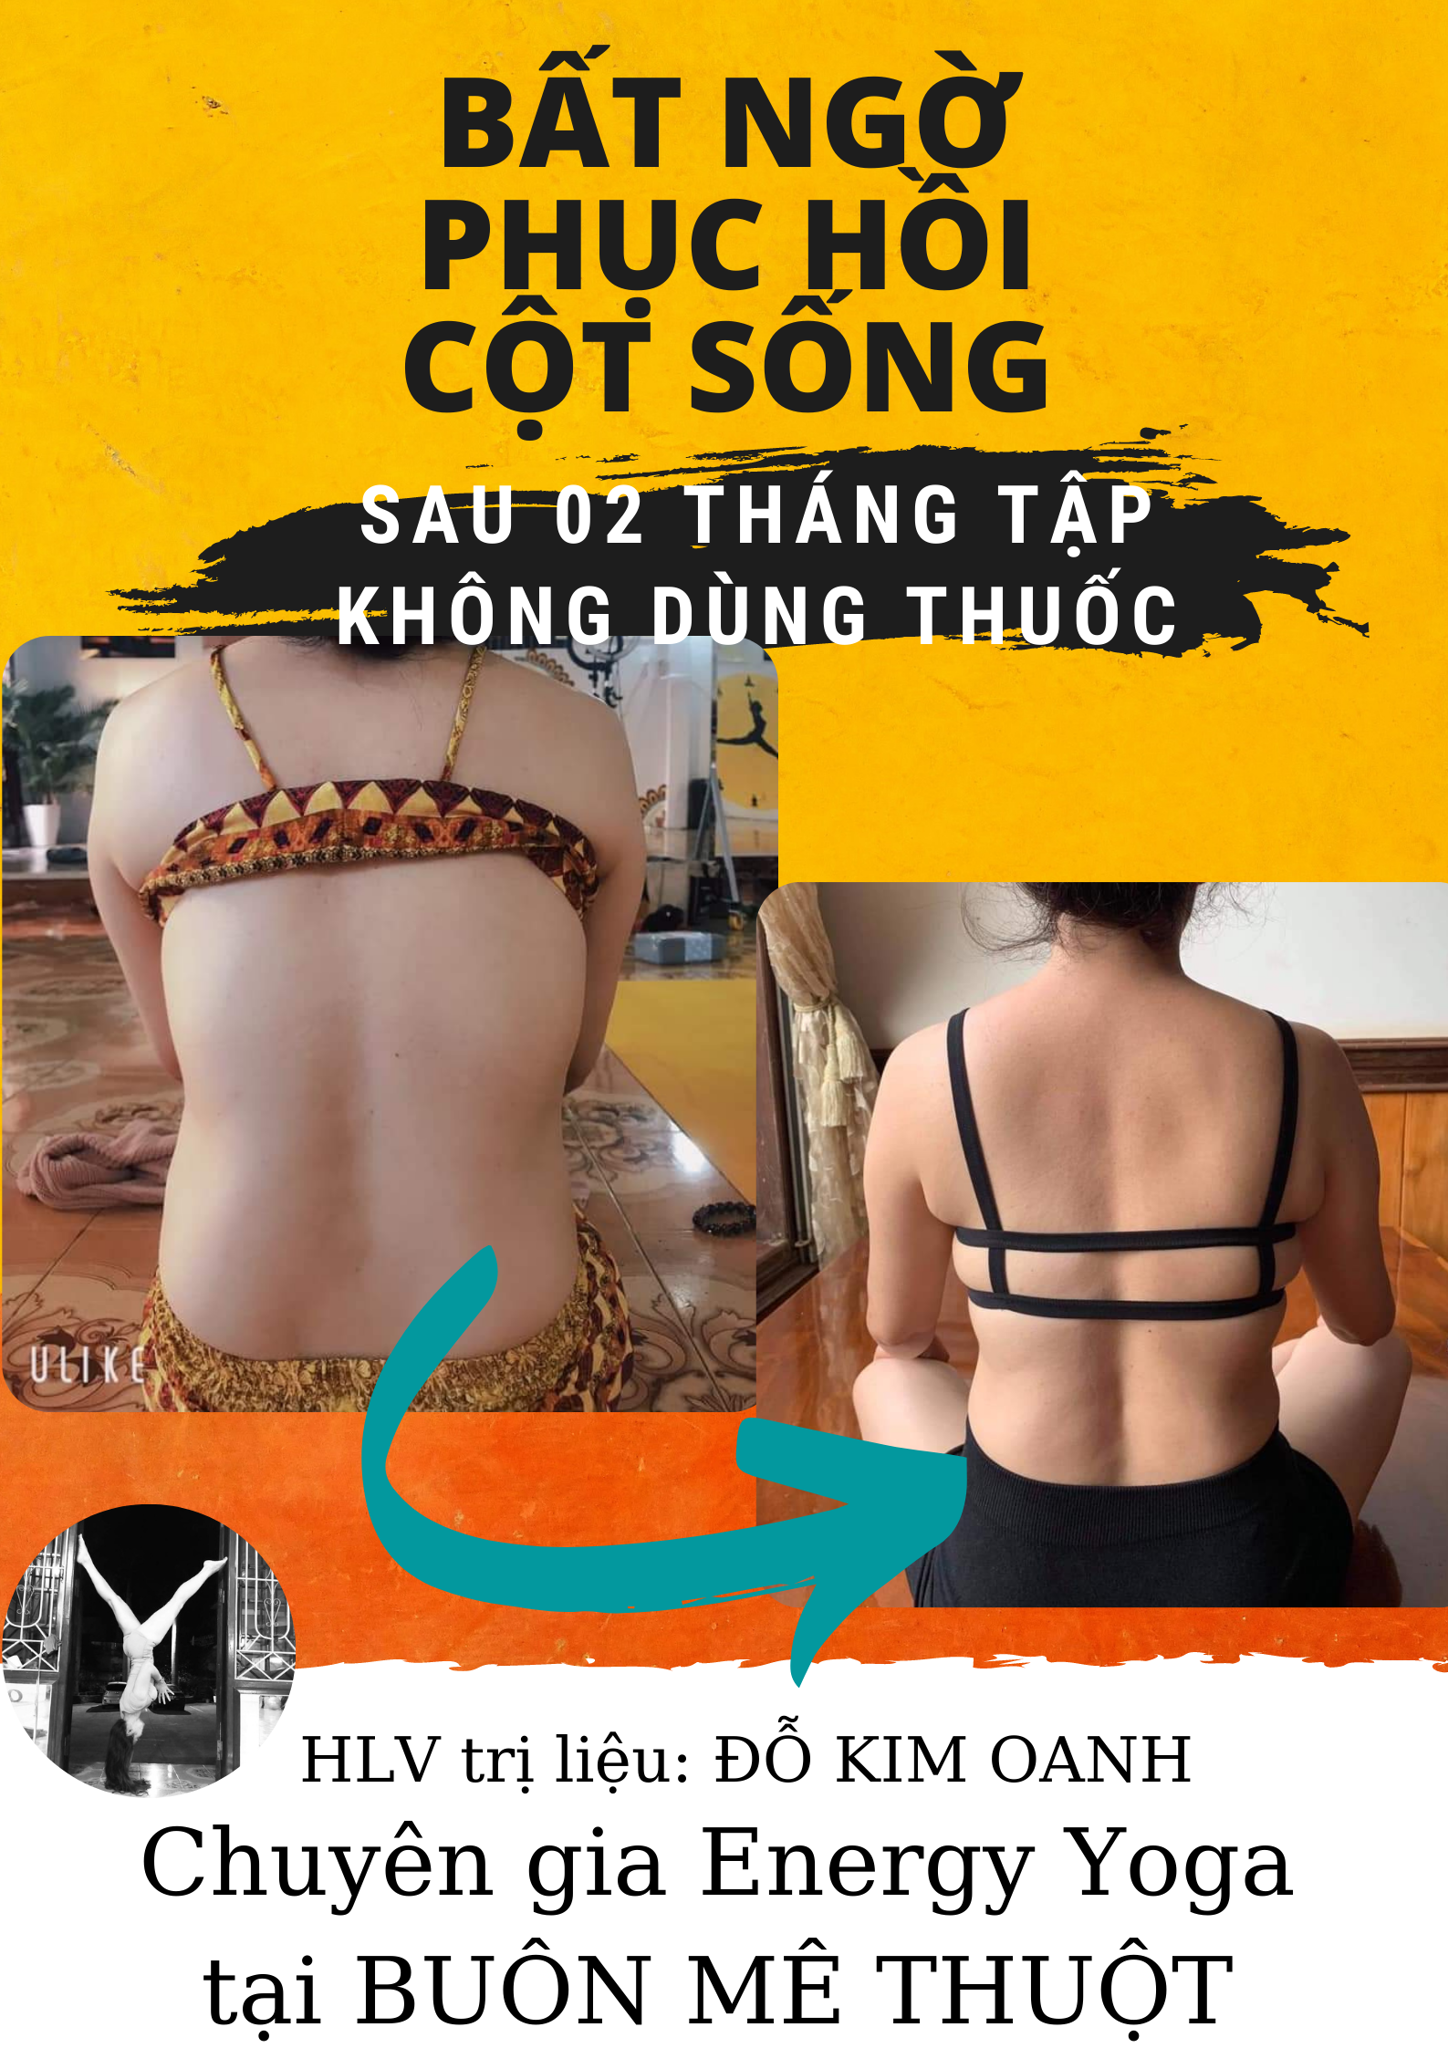 cong vẹo cột sống